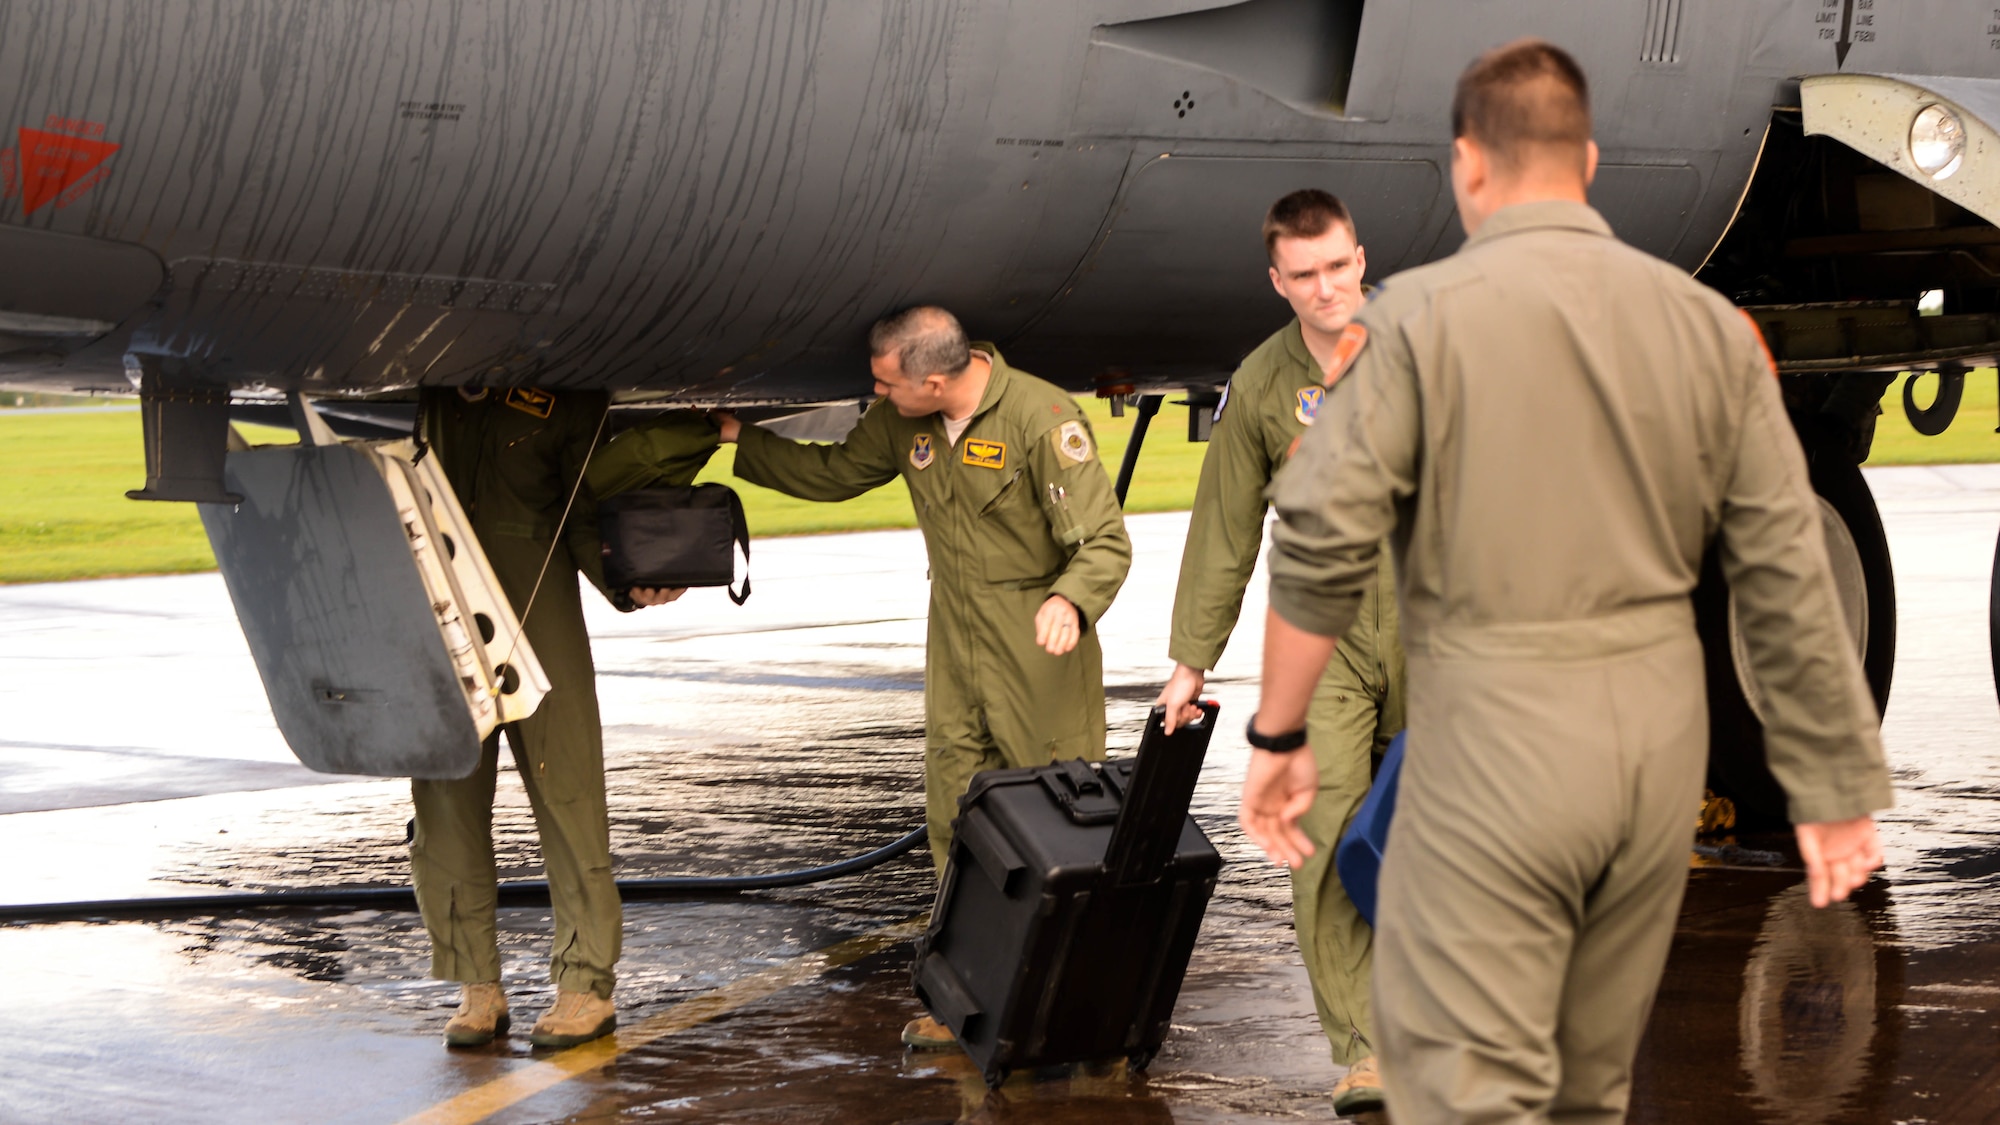 Aircrew retrieve their equipment from a B-52 Stratofortress upon arrival at Fairford Royal Air Force Base, U.K., Sept. 14, 2017.